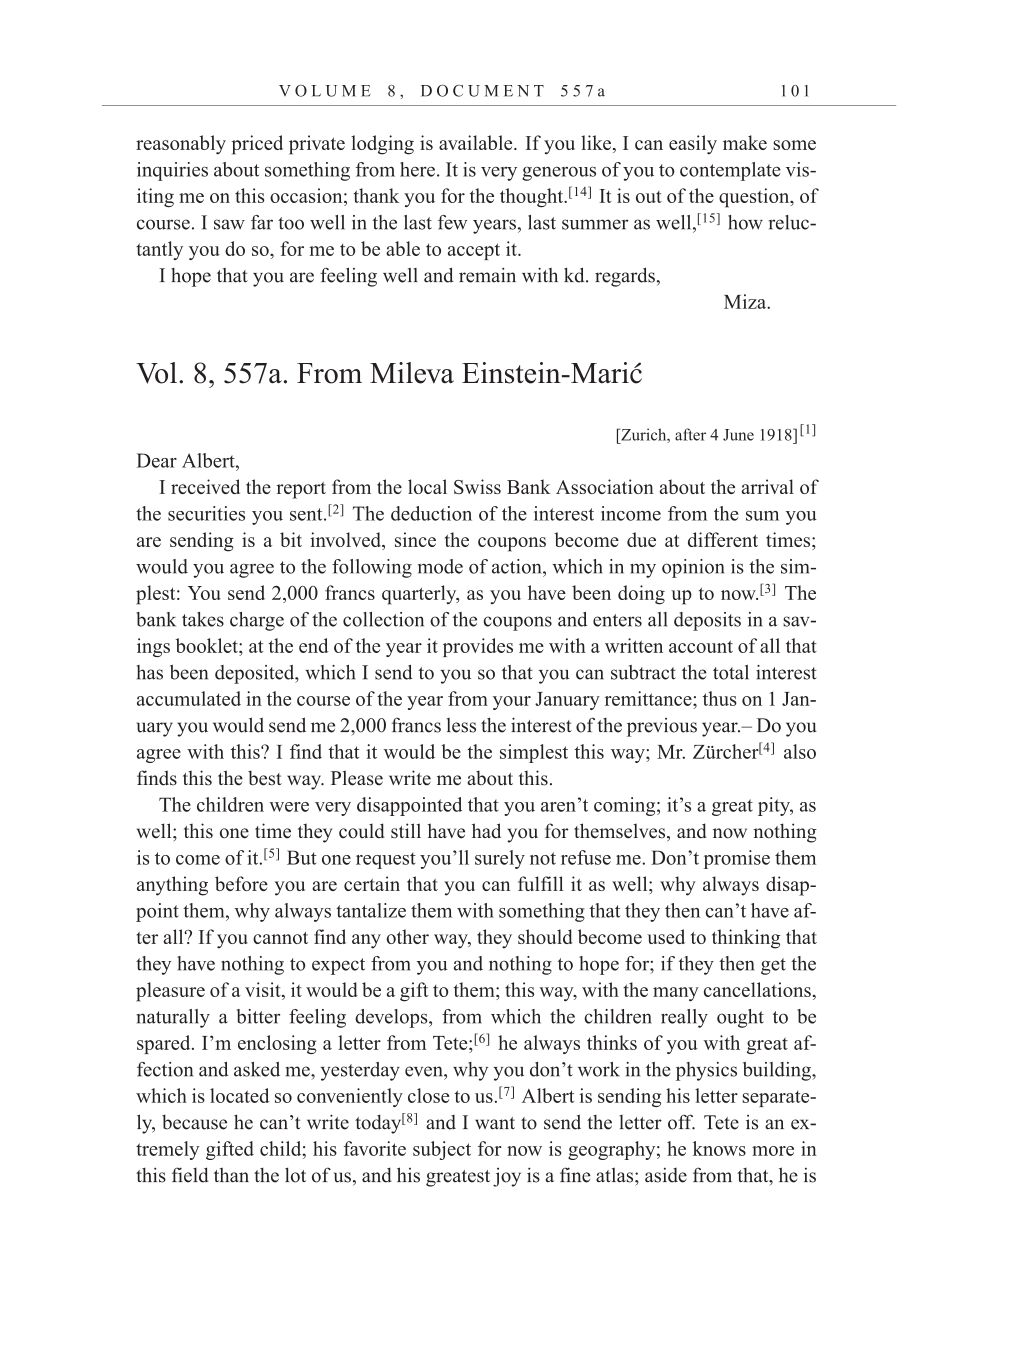 Volume 10: The Berlin Years: Correspondence, May-December 1920, and Supplementary Correspondence, 1909-1920 (English translation supplement) page 101